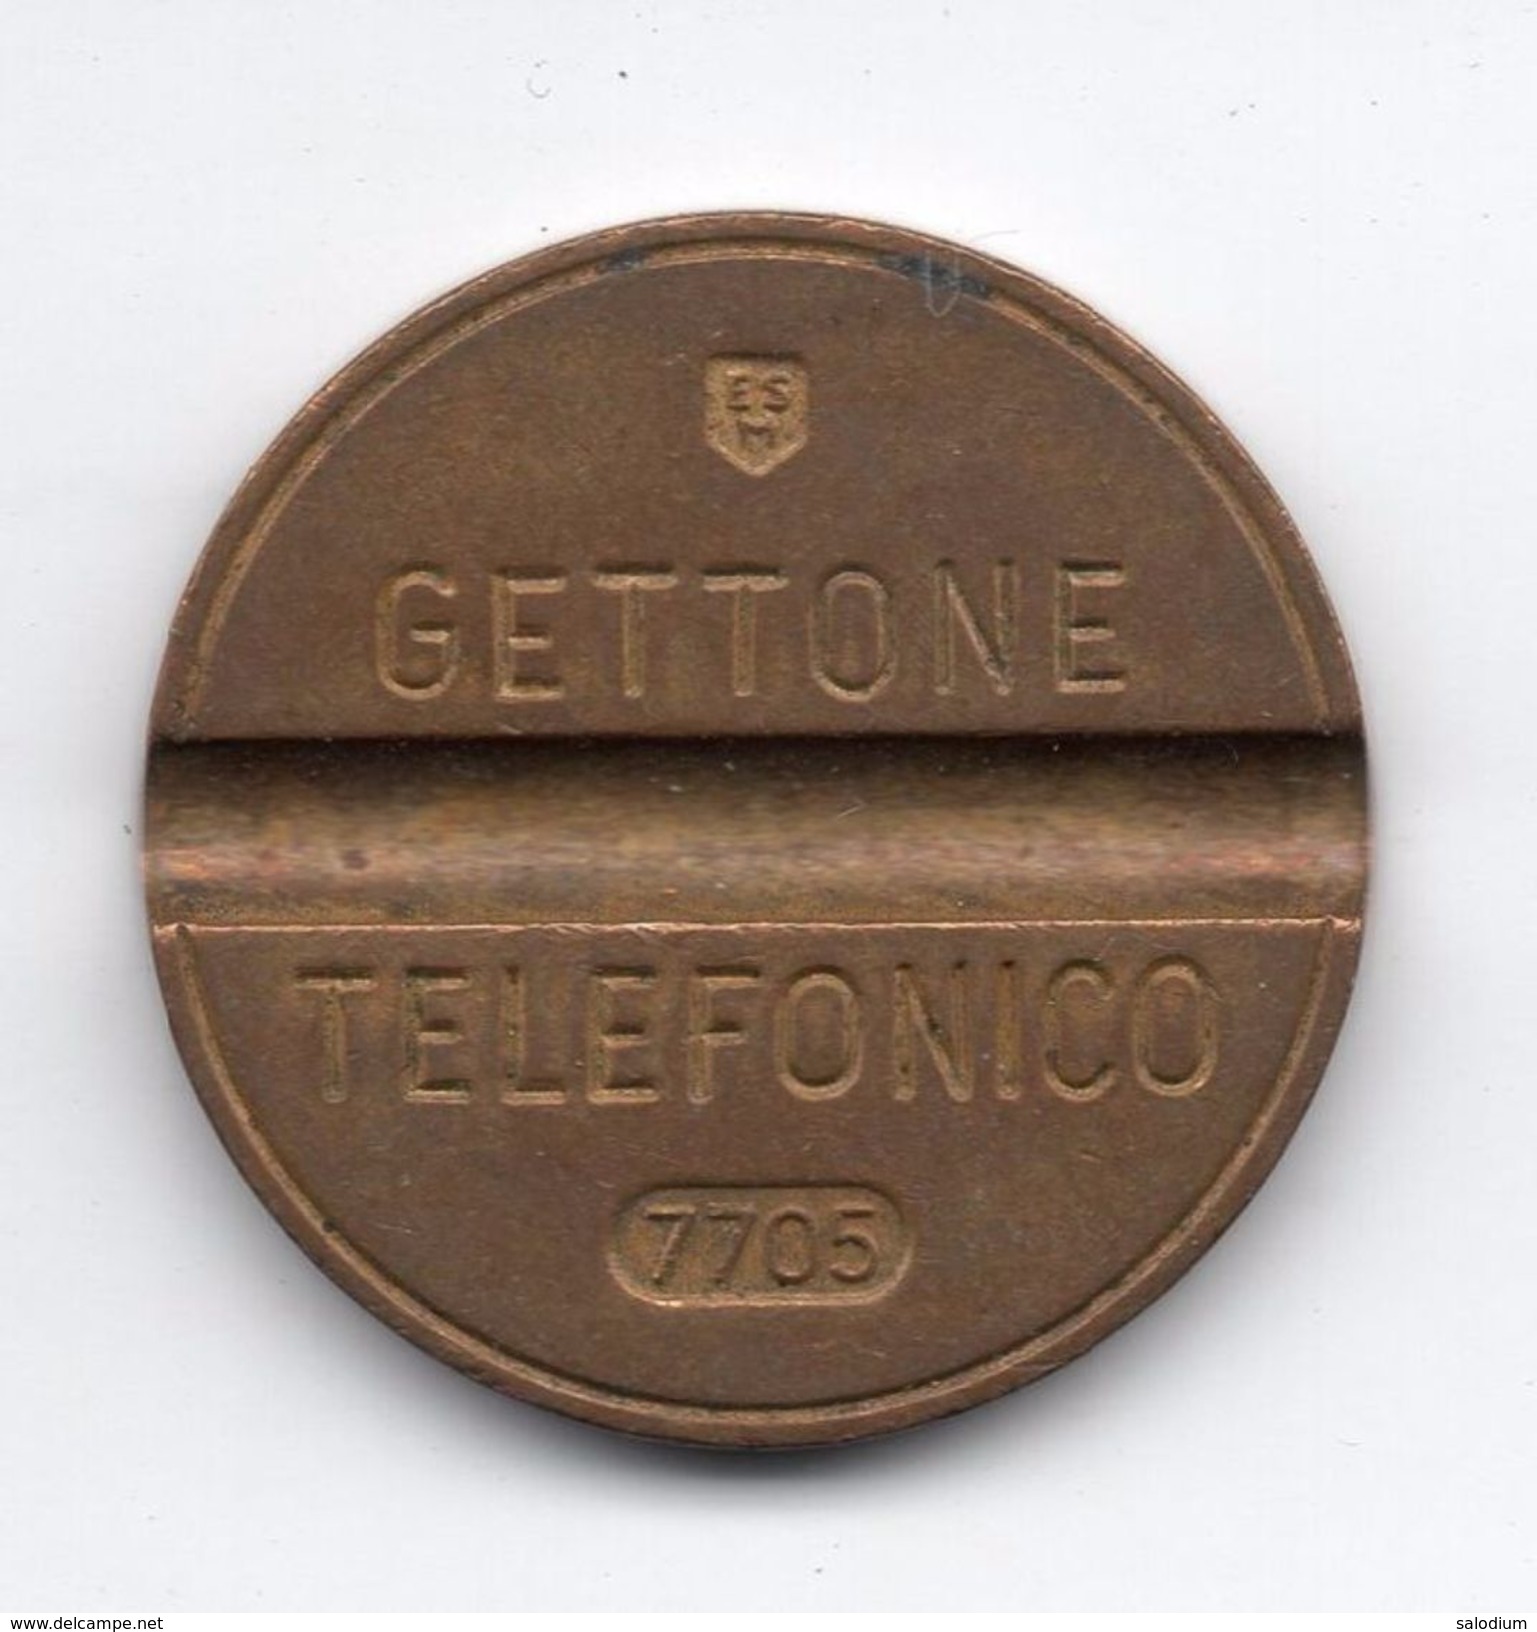 Gettone Telefonico 7705 Token Telephone - (Id-620) - Professionals/Firms